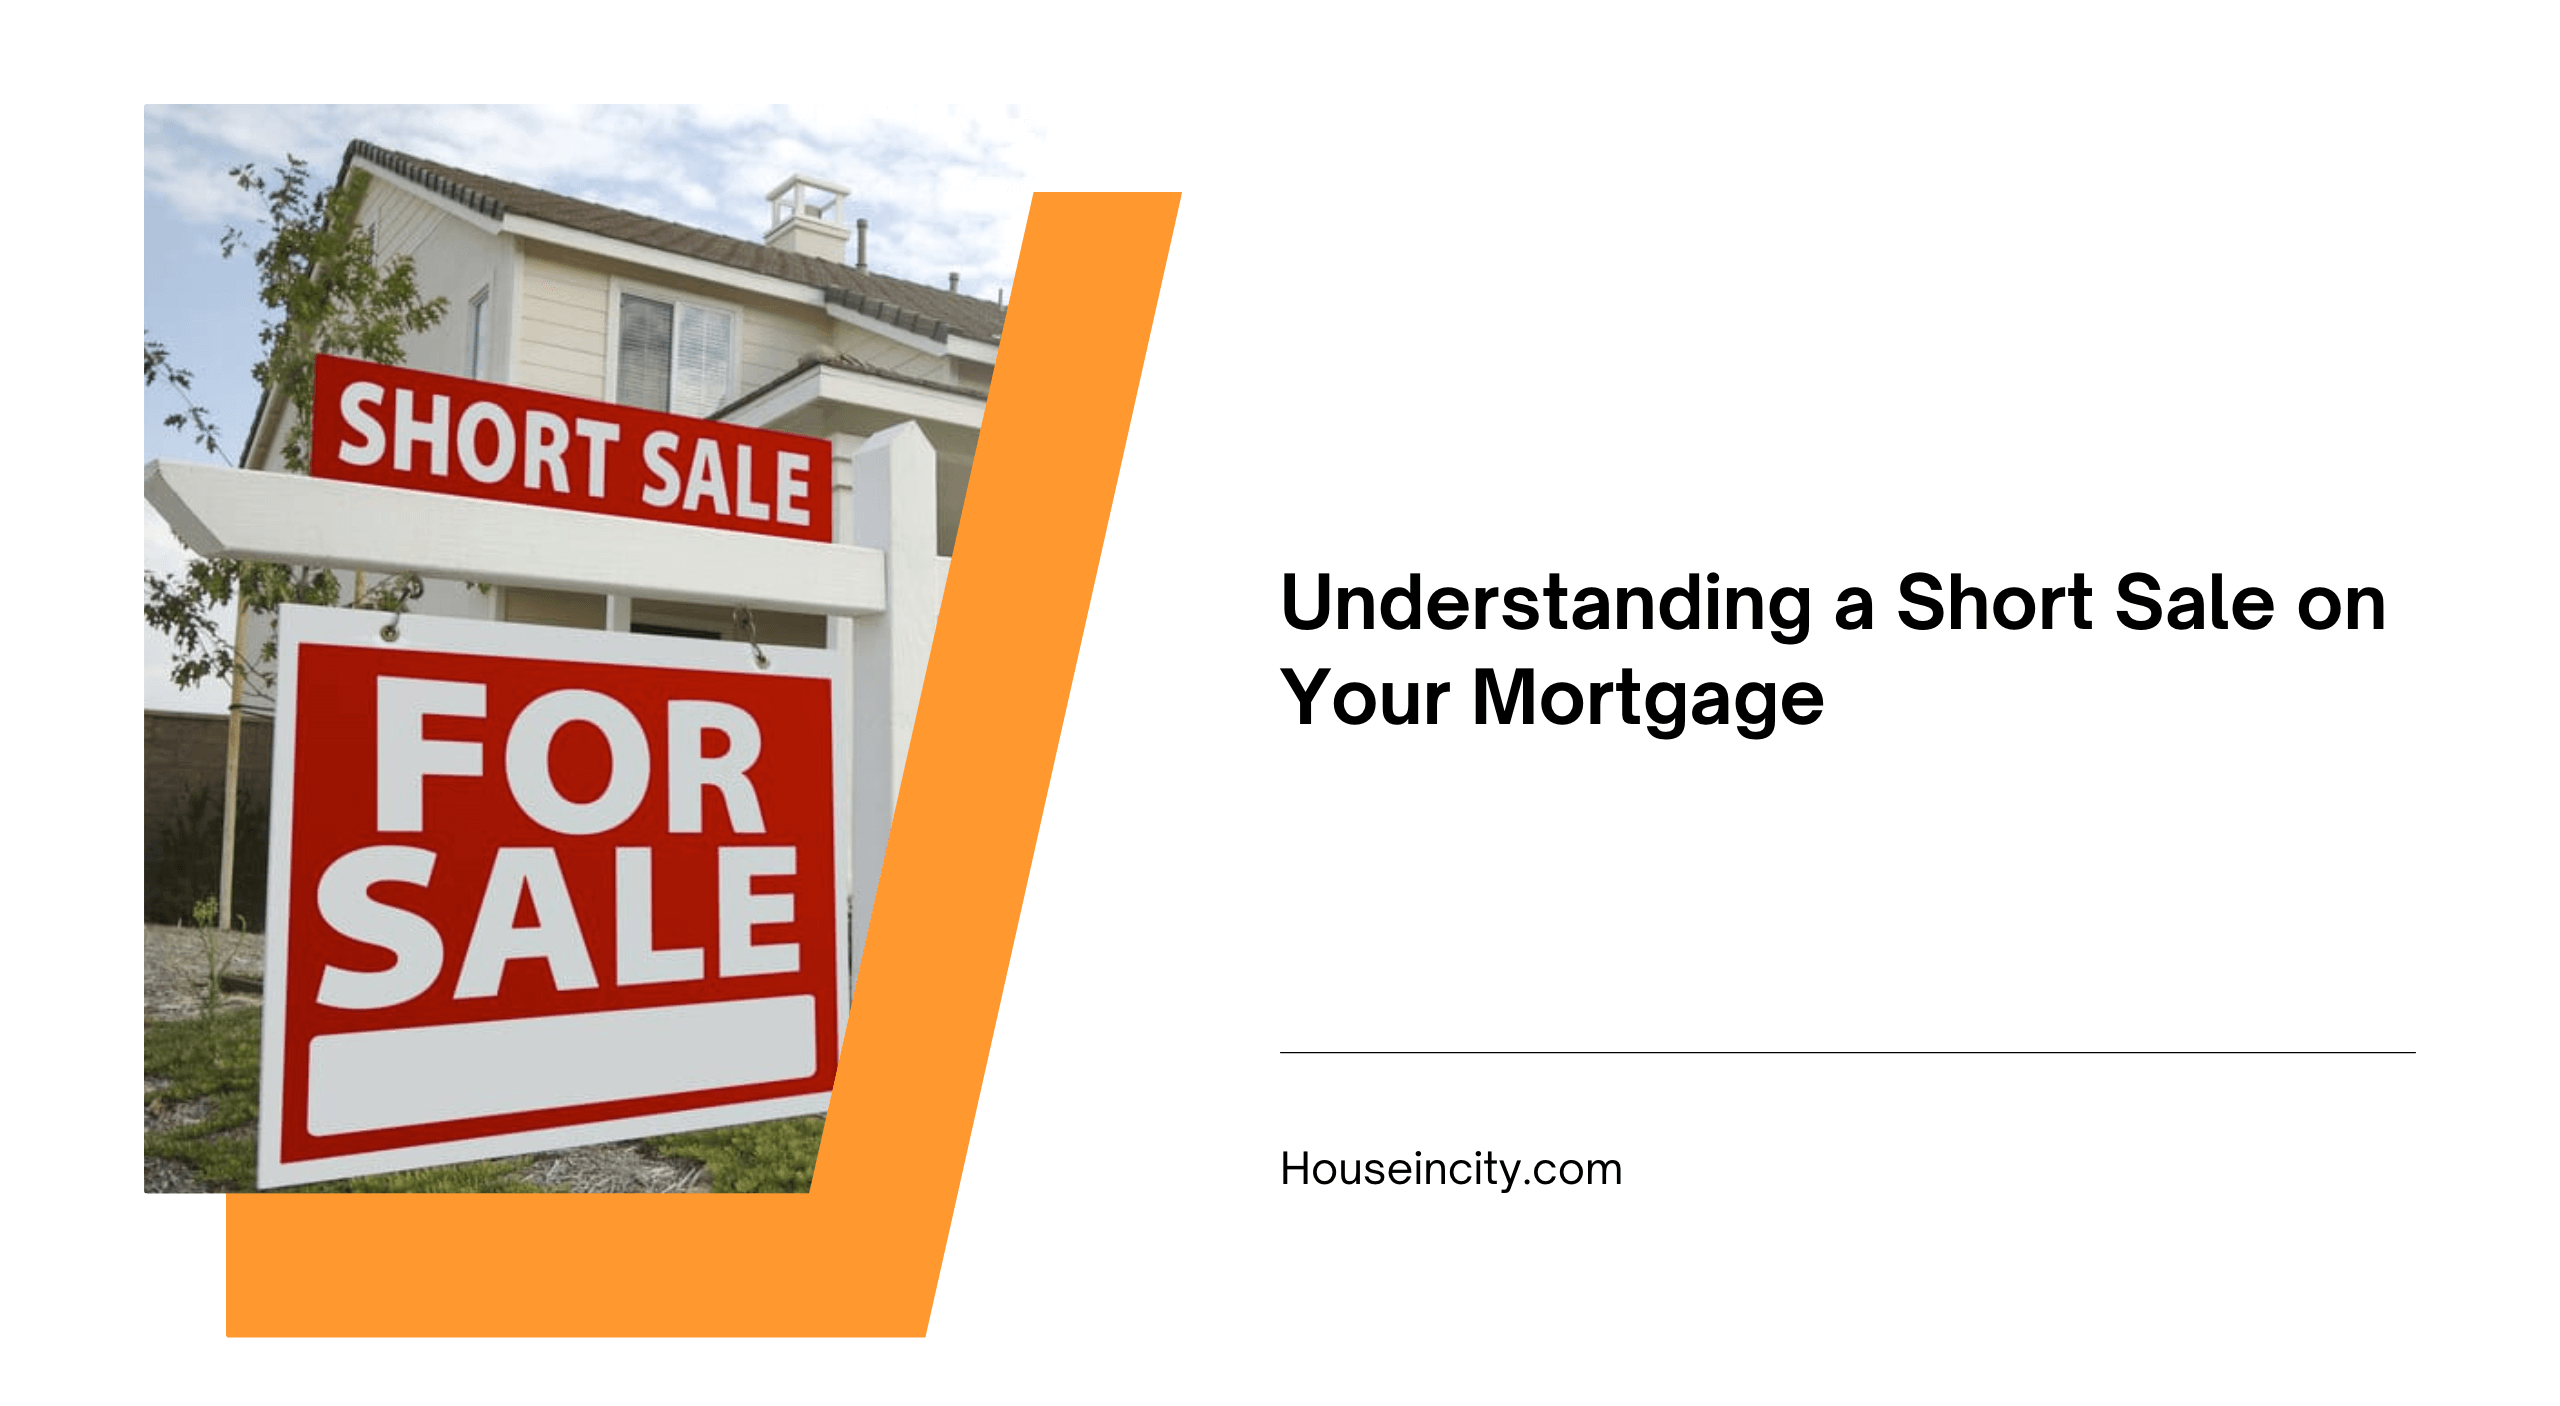 Understanding a Short Sale on Your Mortgage